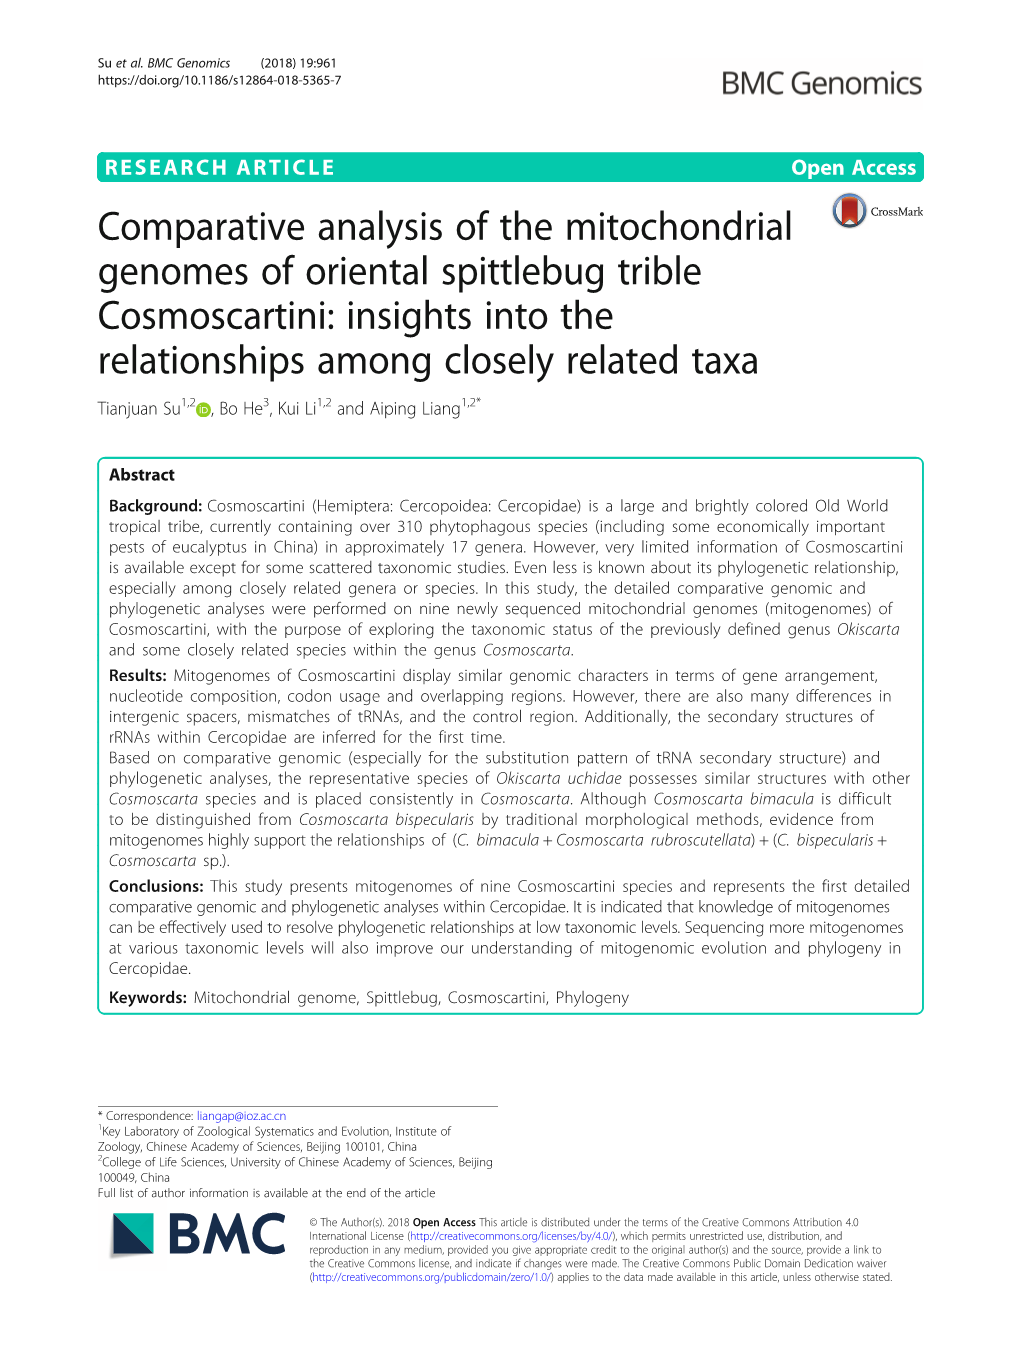 Comparative Analysis of the Mitochondrial Genomes of Oriental Spittlebug Trible Cosmoscartini: Insights Into the Relationships A